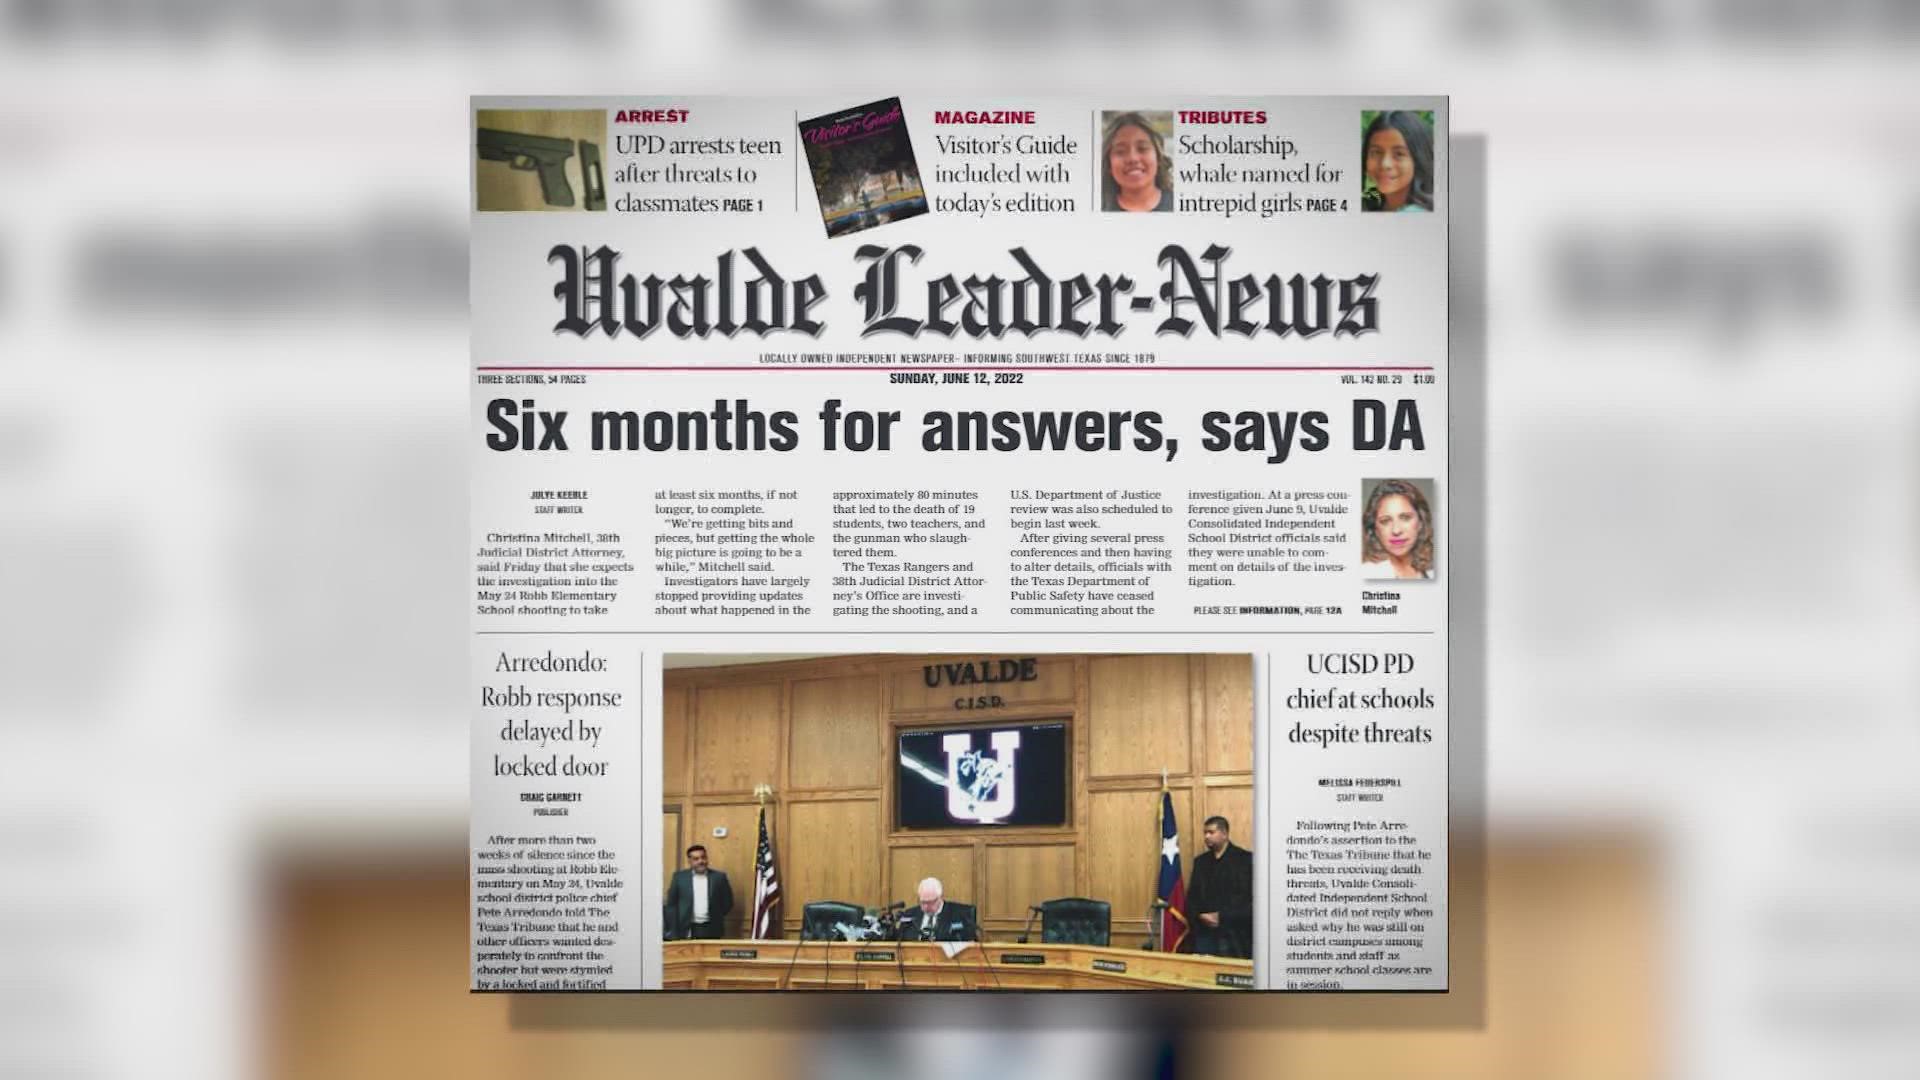 He referenced this front page of Sunday's Uvalde Leader News and criticized comments made by the Uvalde district attorney Christina Mitchell.